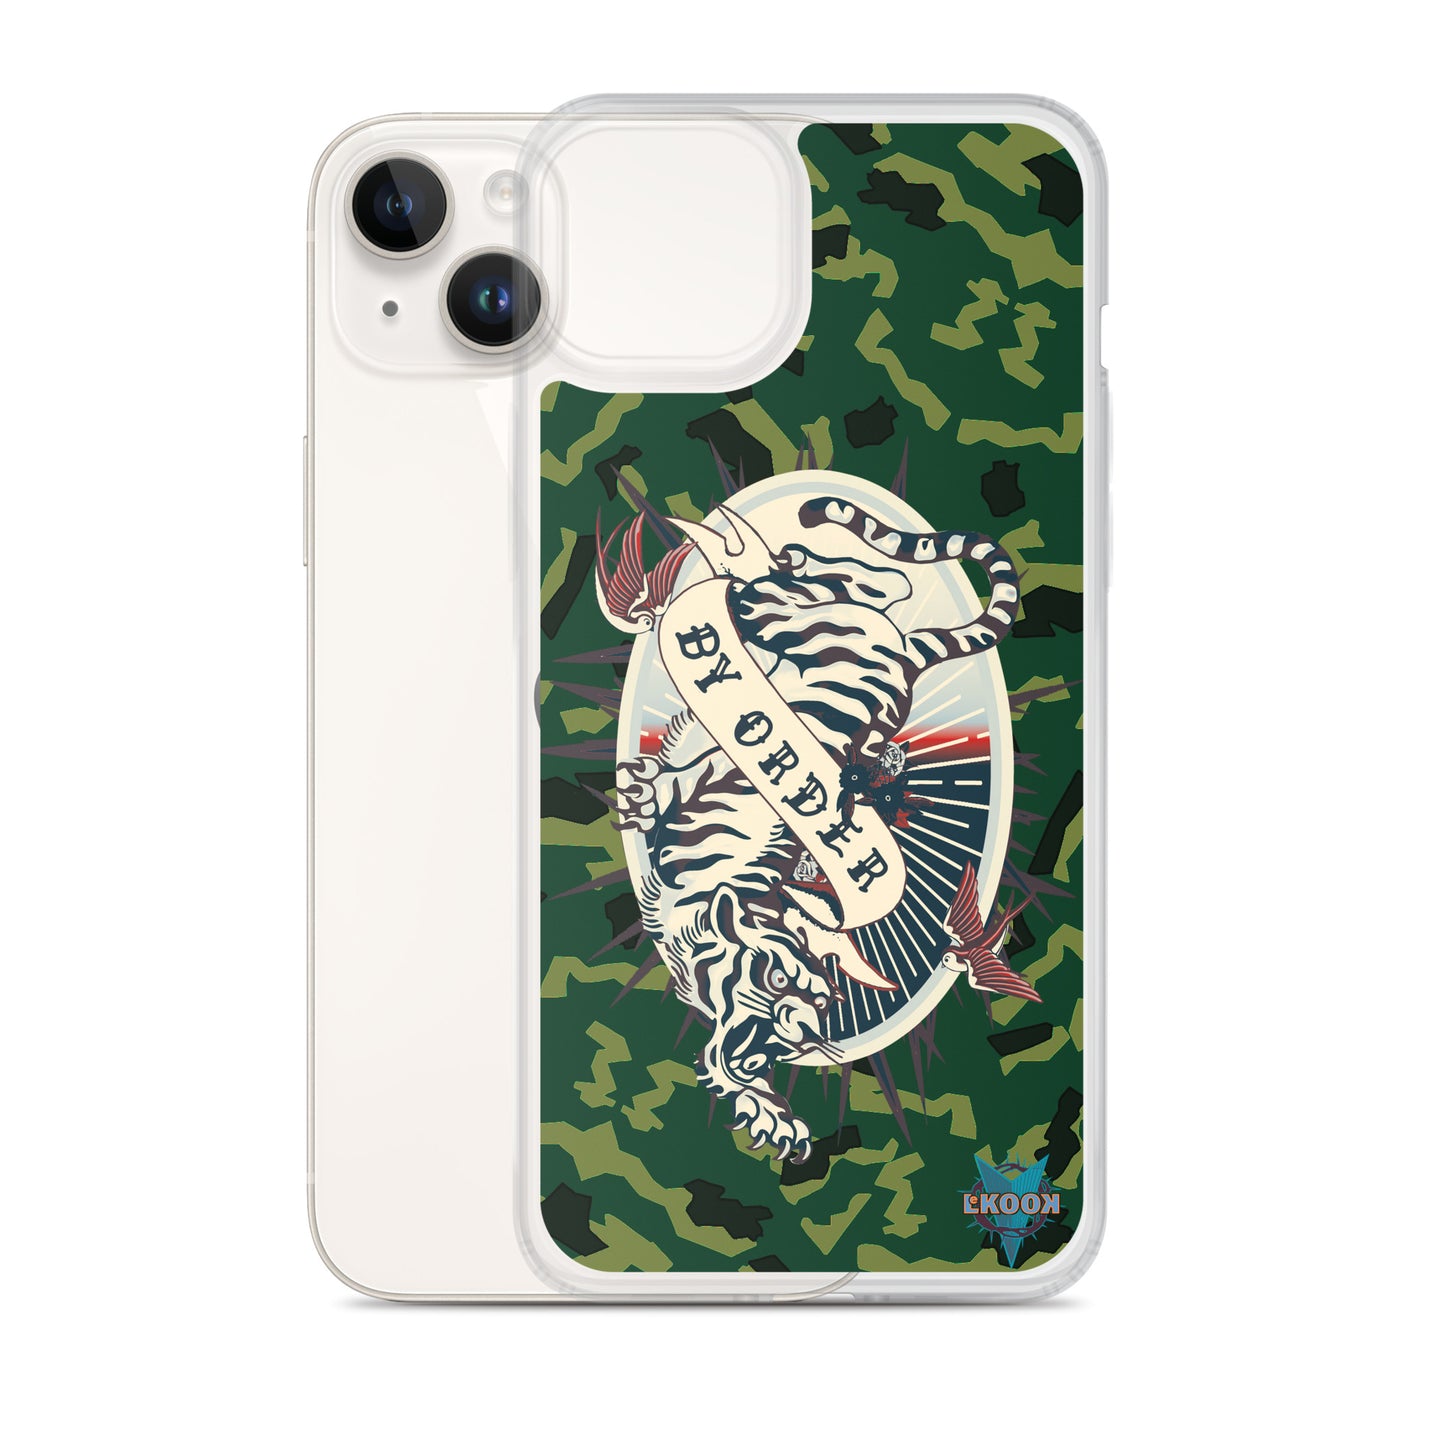 BY ORDER GREEN TIGER IPHONE CASE